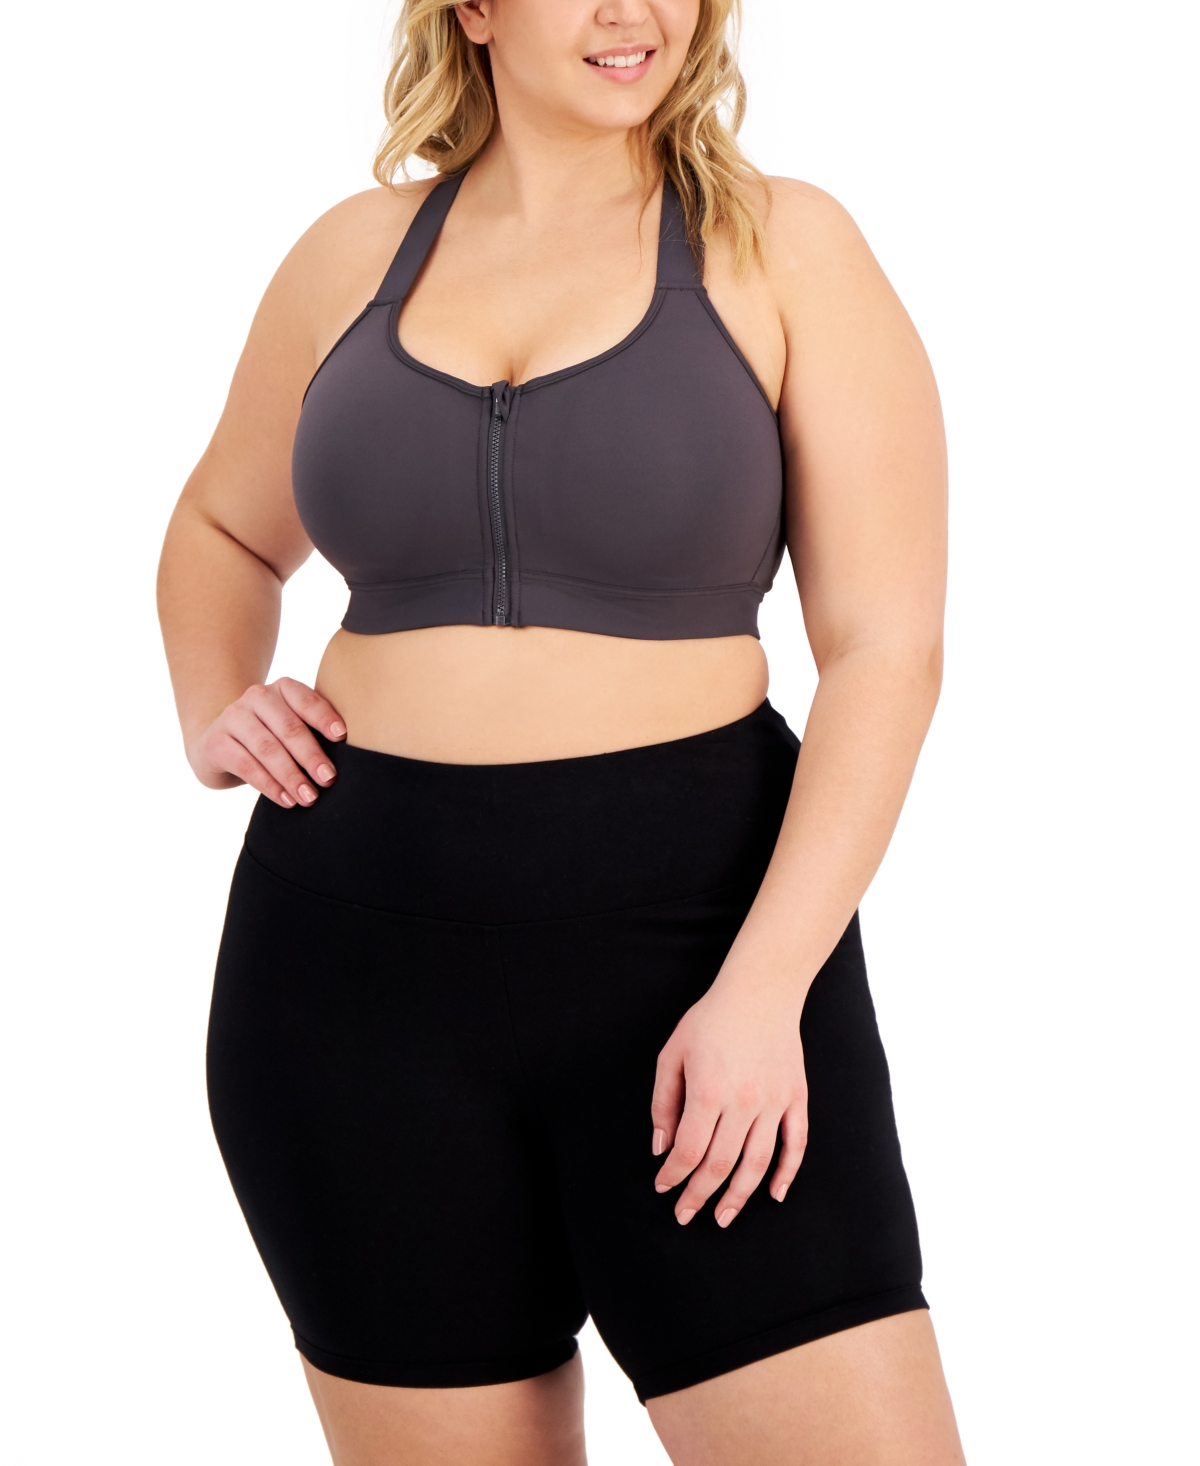 Plus Size High-Impact Zip-Front Sports Bra, Created for Macy's - Bright White